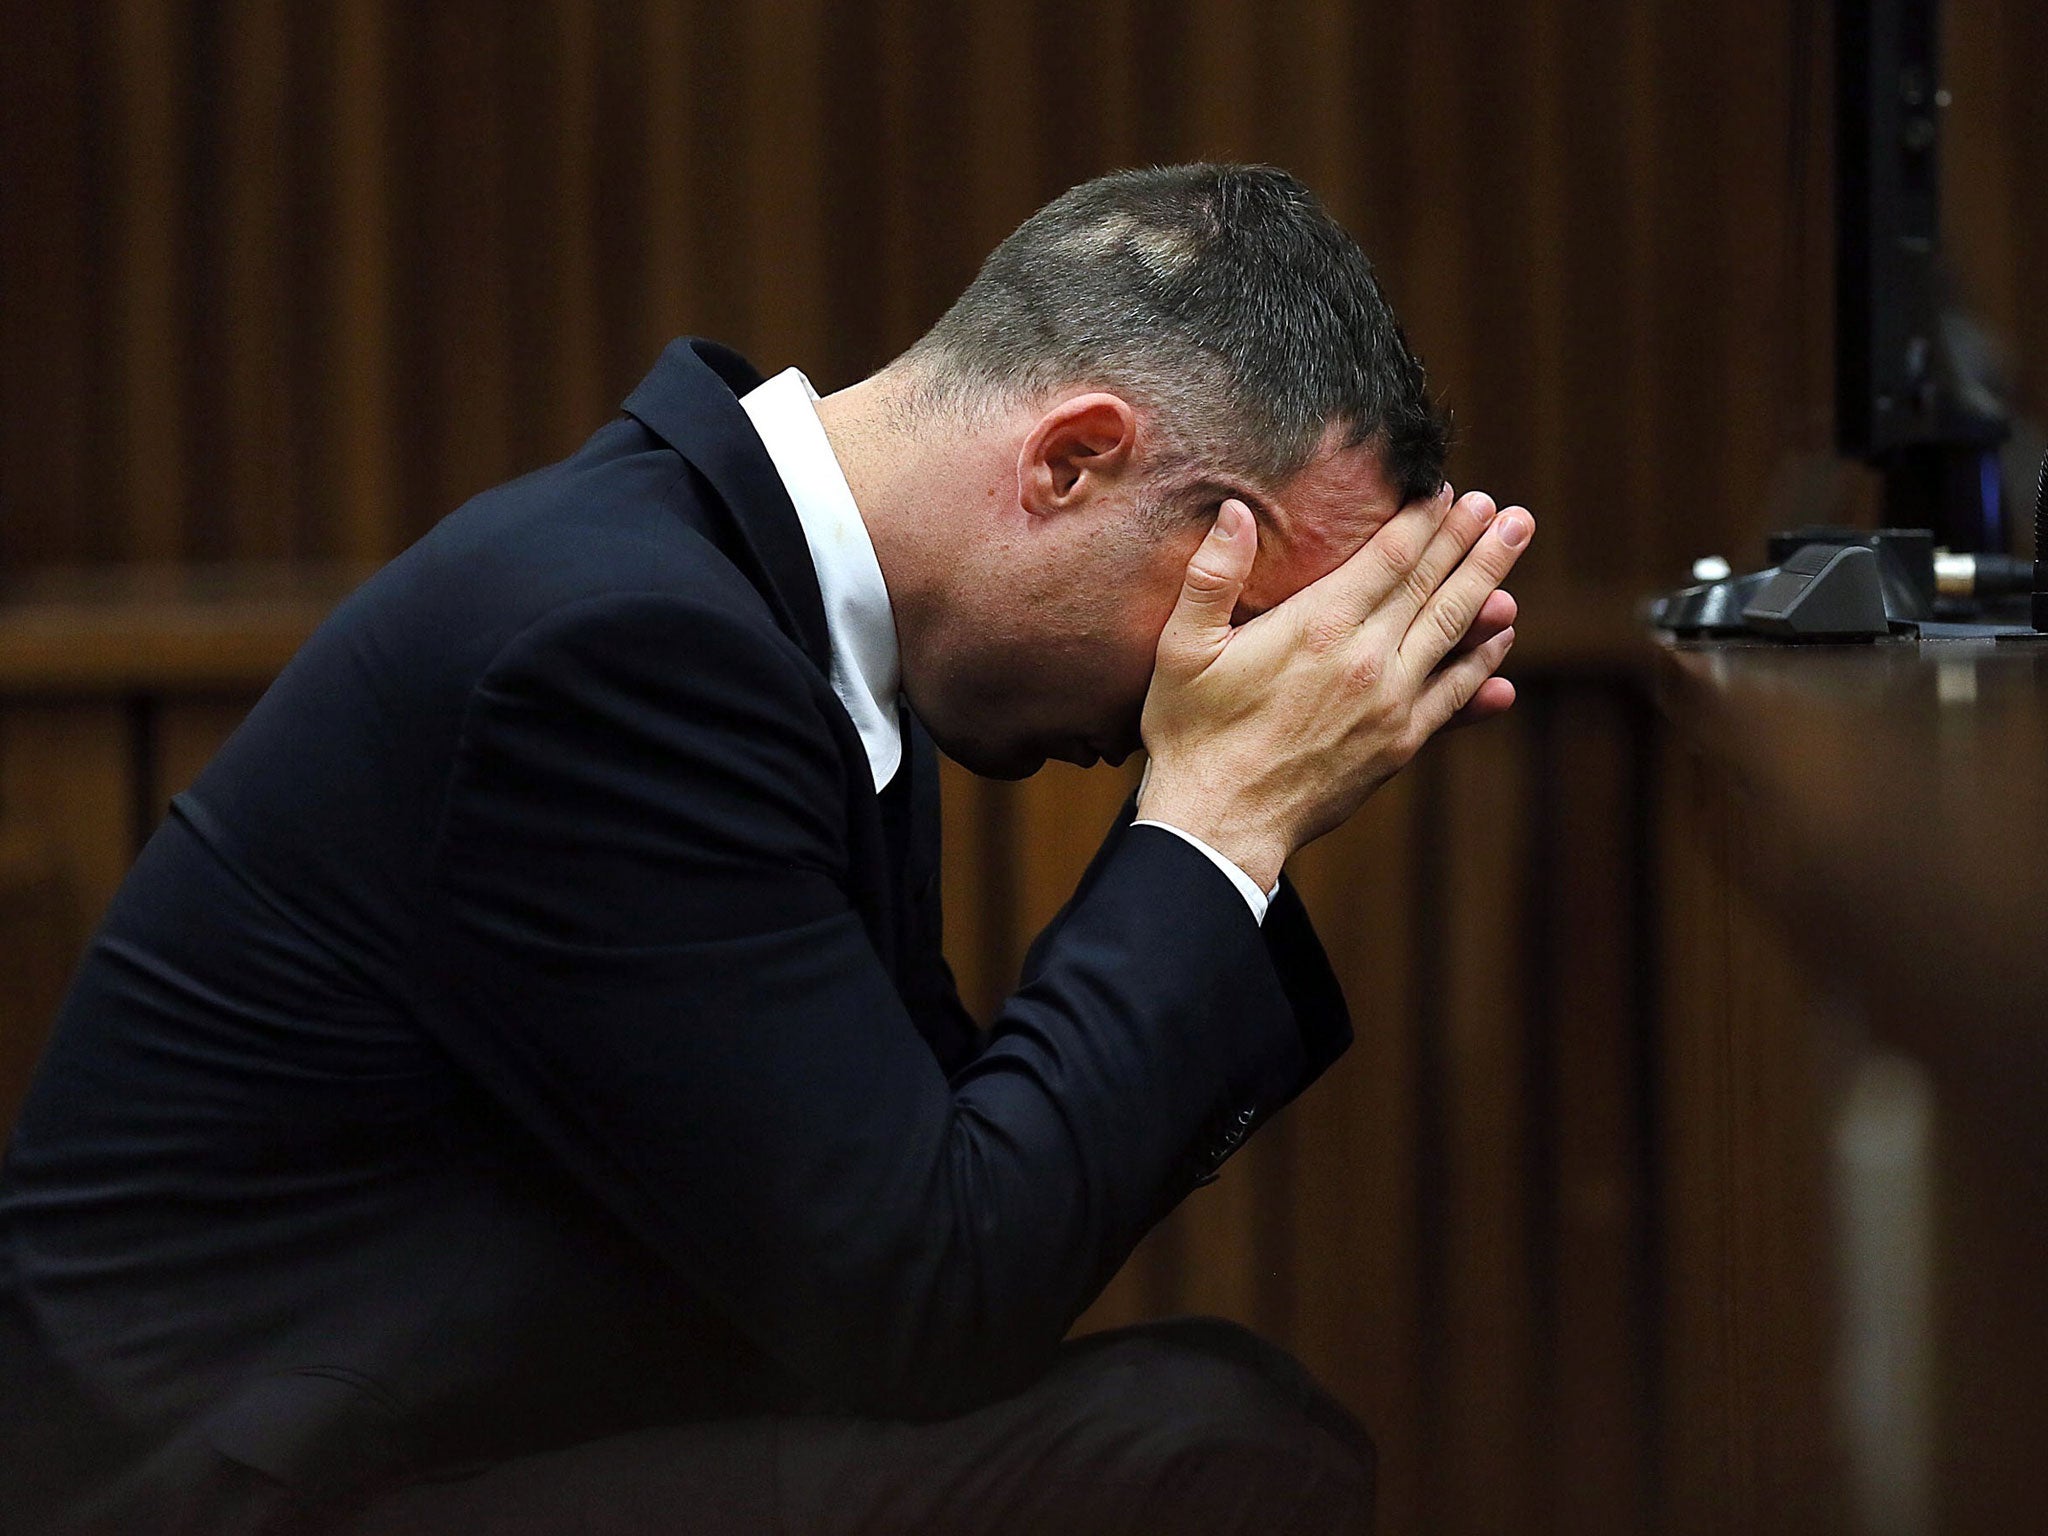 The fate of Oscar Pistorius will be decided by Judge Masipa with the help of two assistants